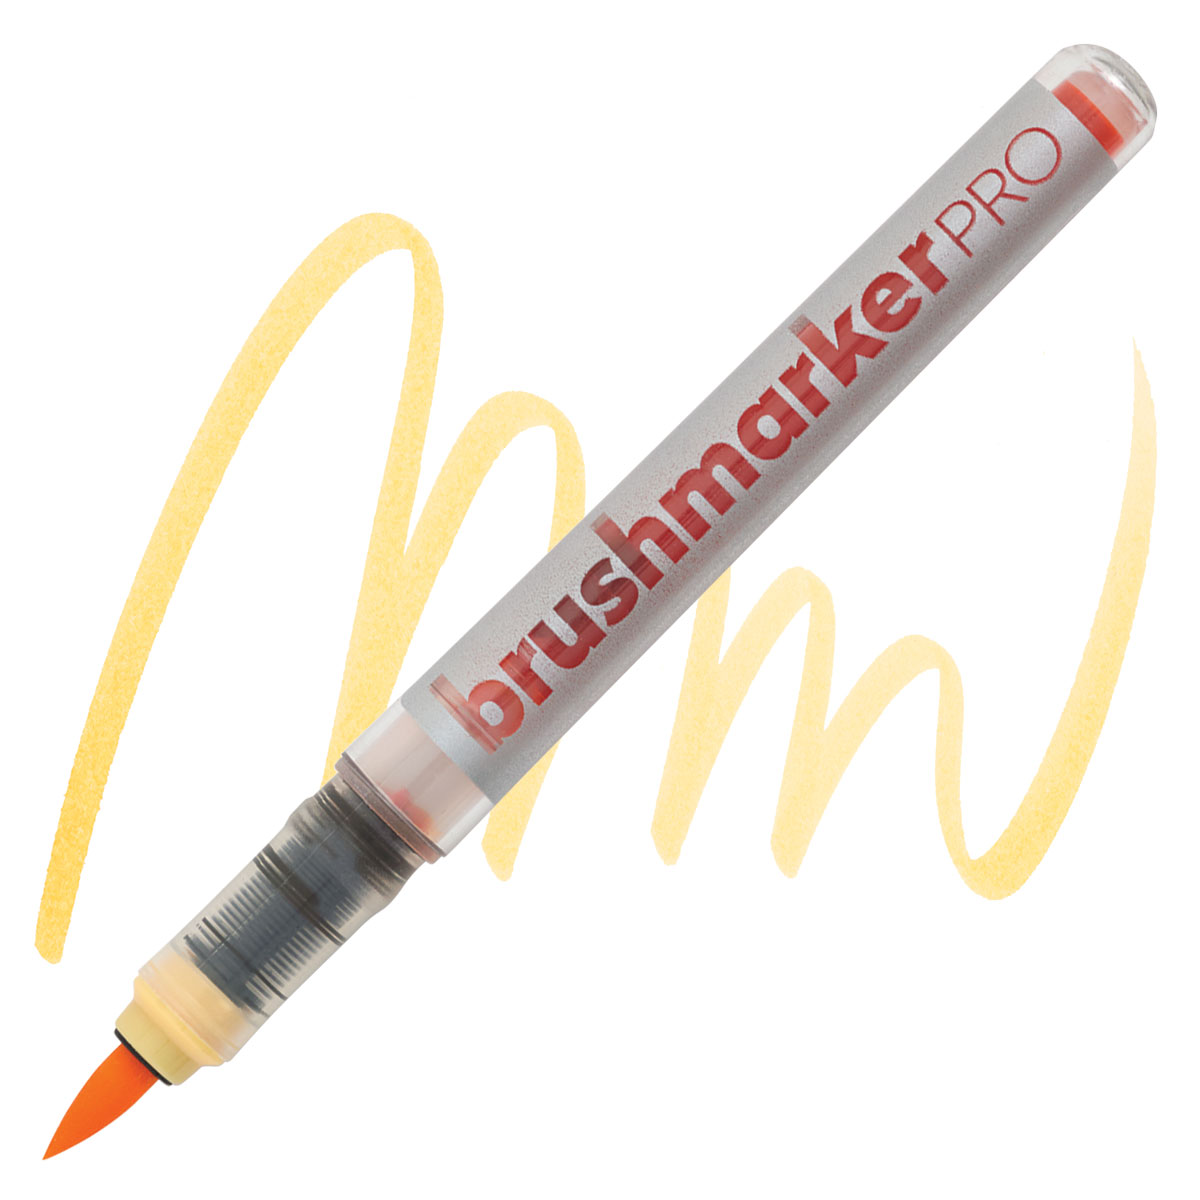 Karin Brushmarkers PRO, Introduction — Art & Happiness